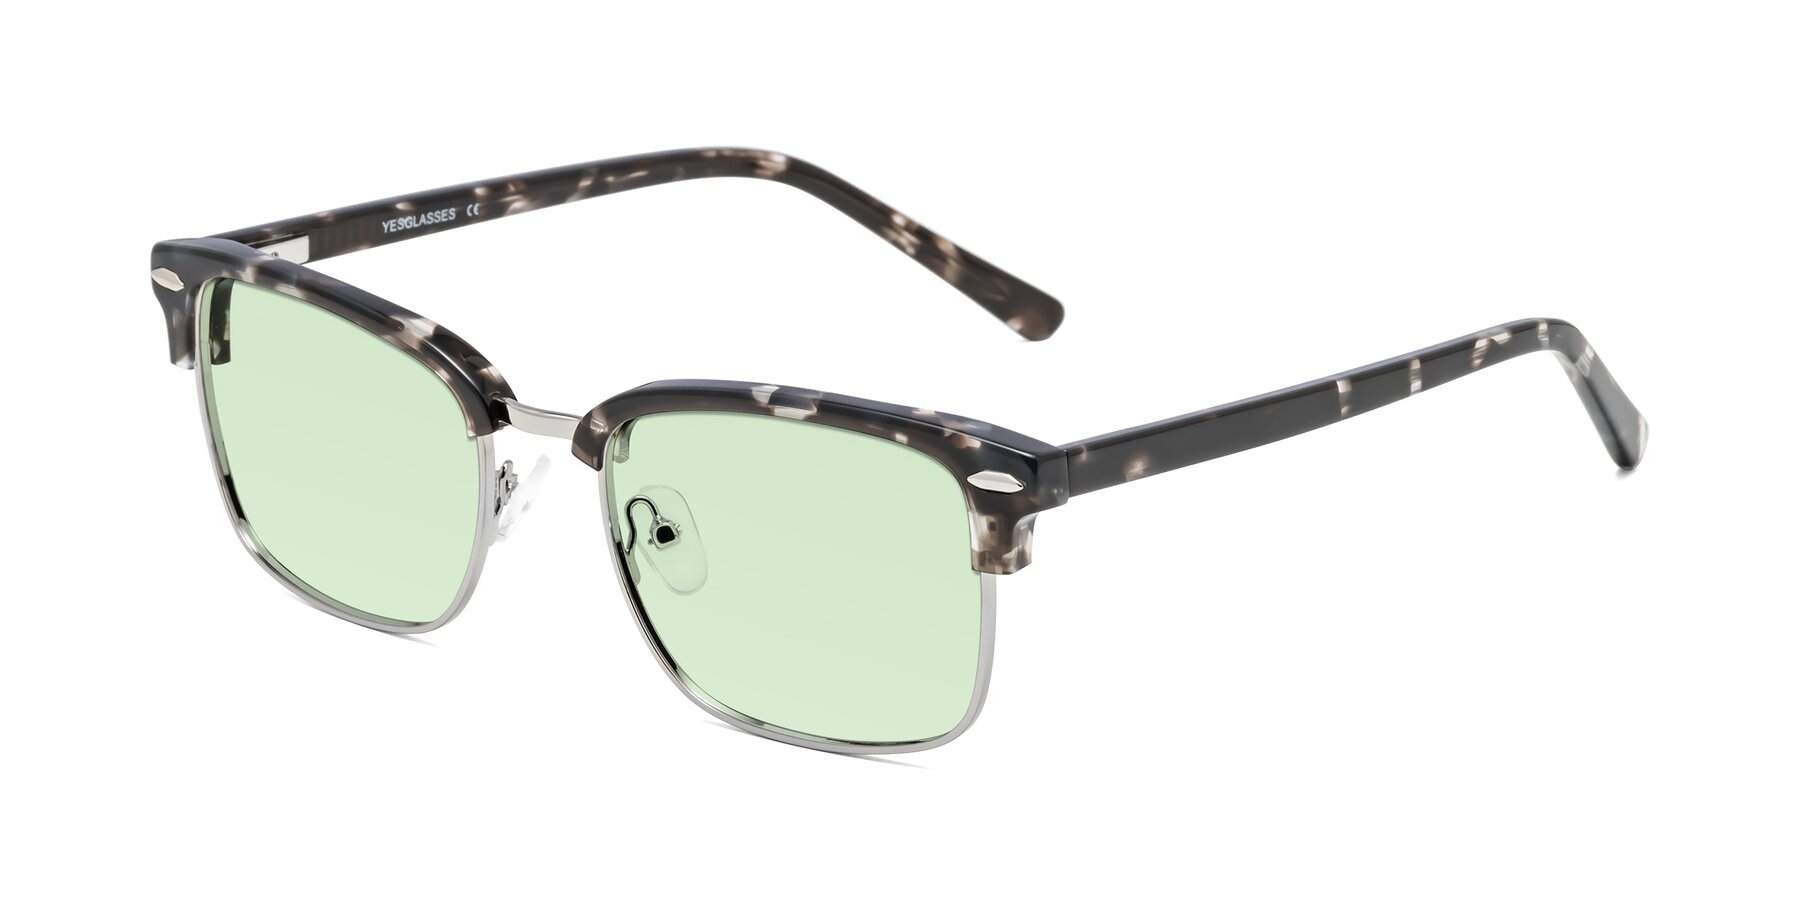 Angle of 17464 in Tortoise-Silver with Light Green Tinted Lenses